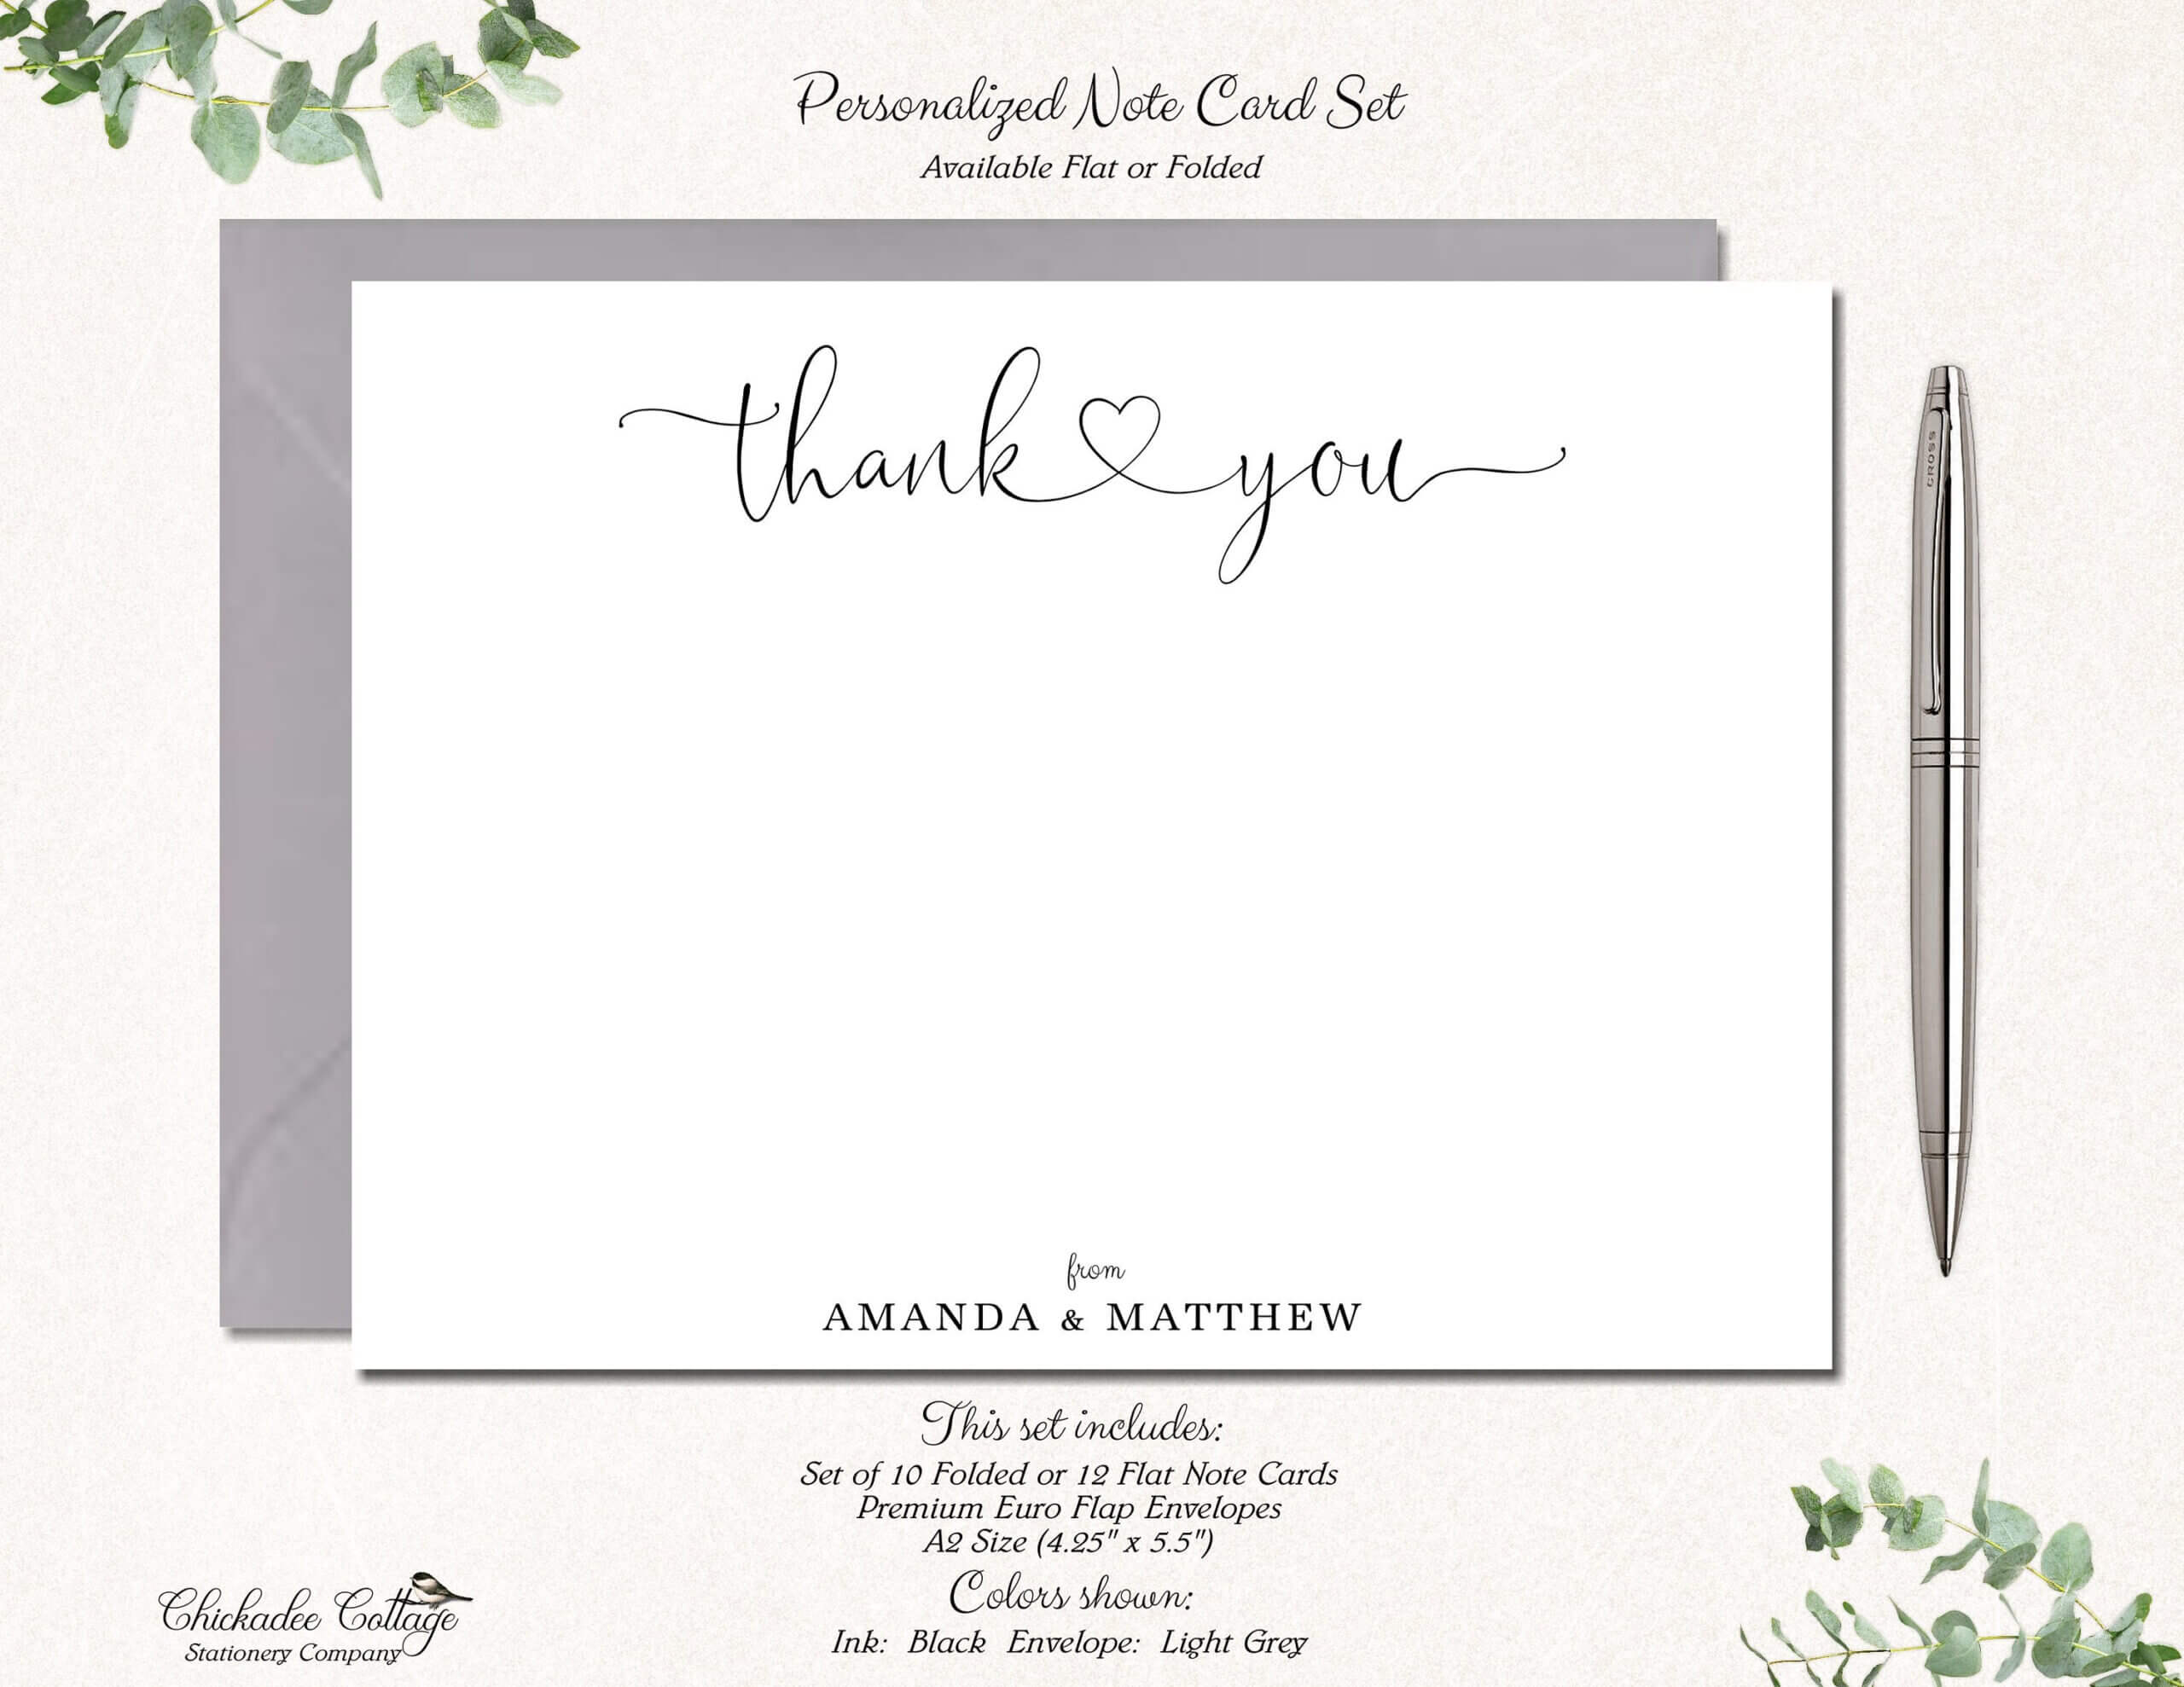 008 Template Ideas Il Fullxfull 1879552839 R9Yp Bridal With Regard To Thank You Note Card Template